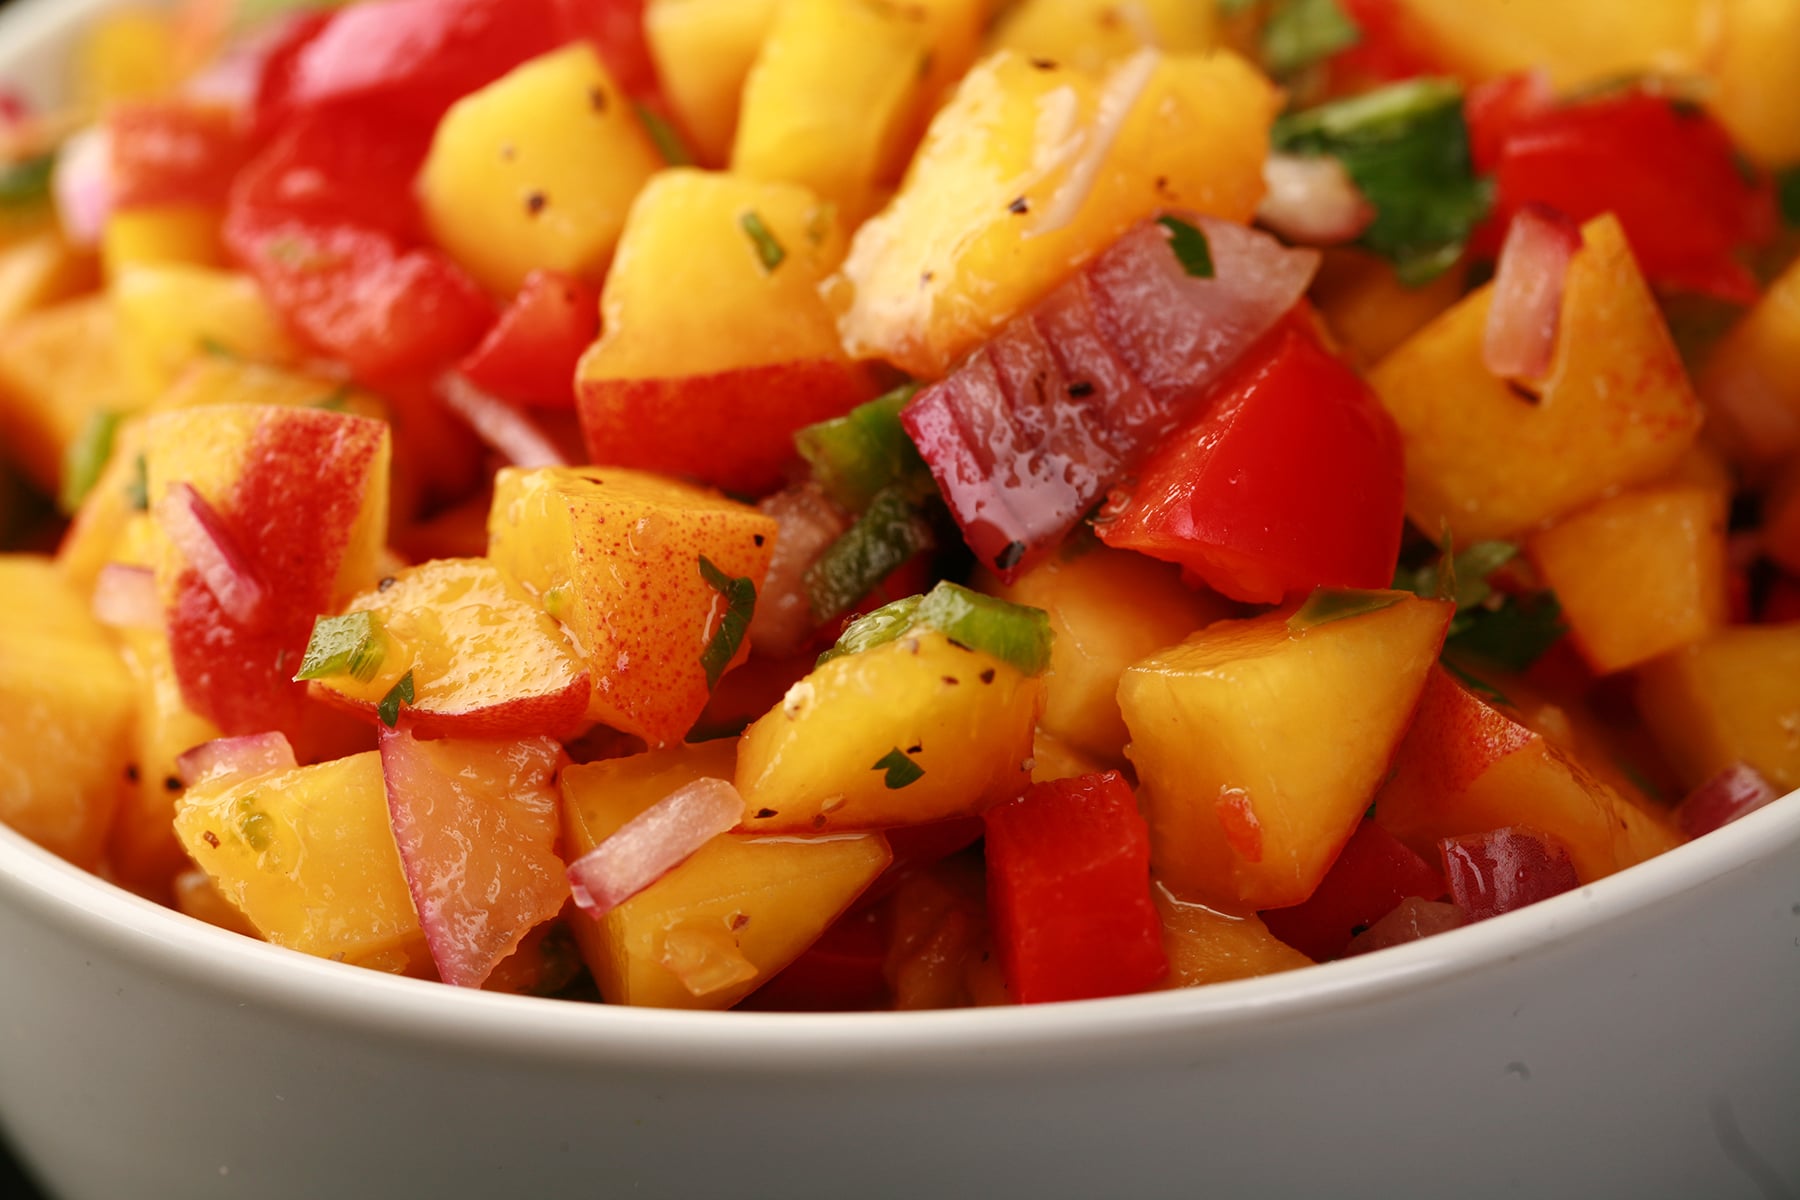 A close up photo of fresh peach salsa, with peaches, red pepper, red onions, jamapeno, and cilatro visible.